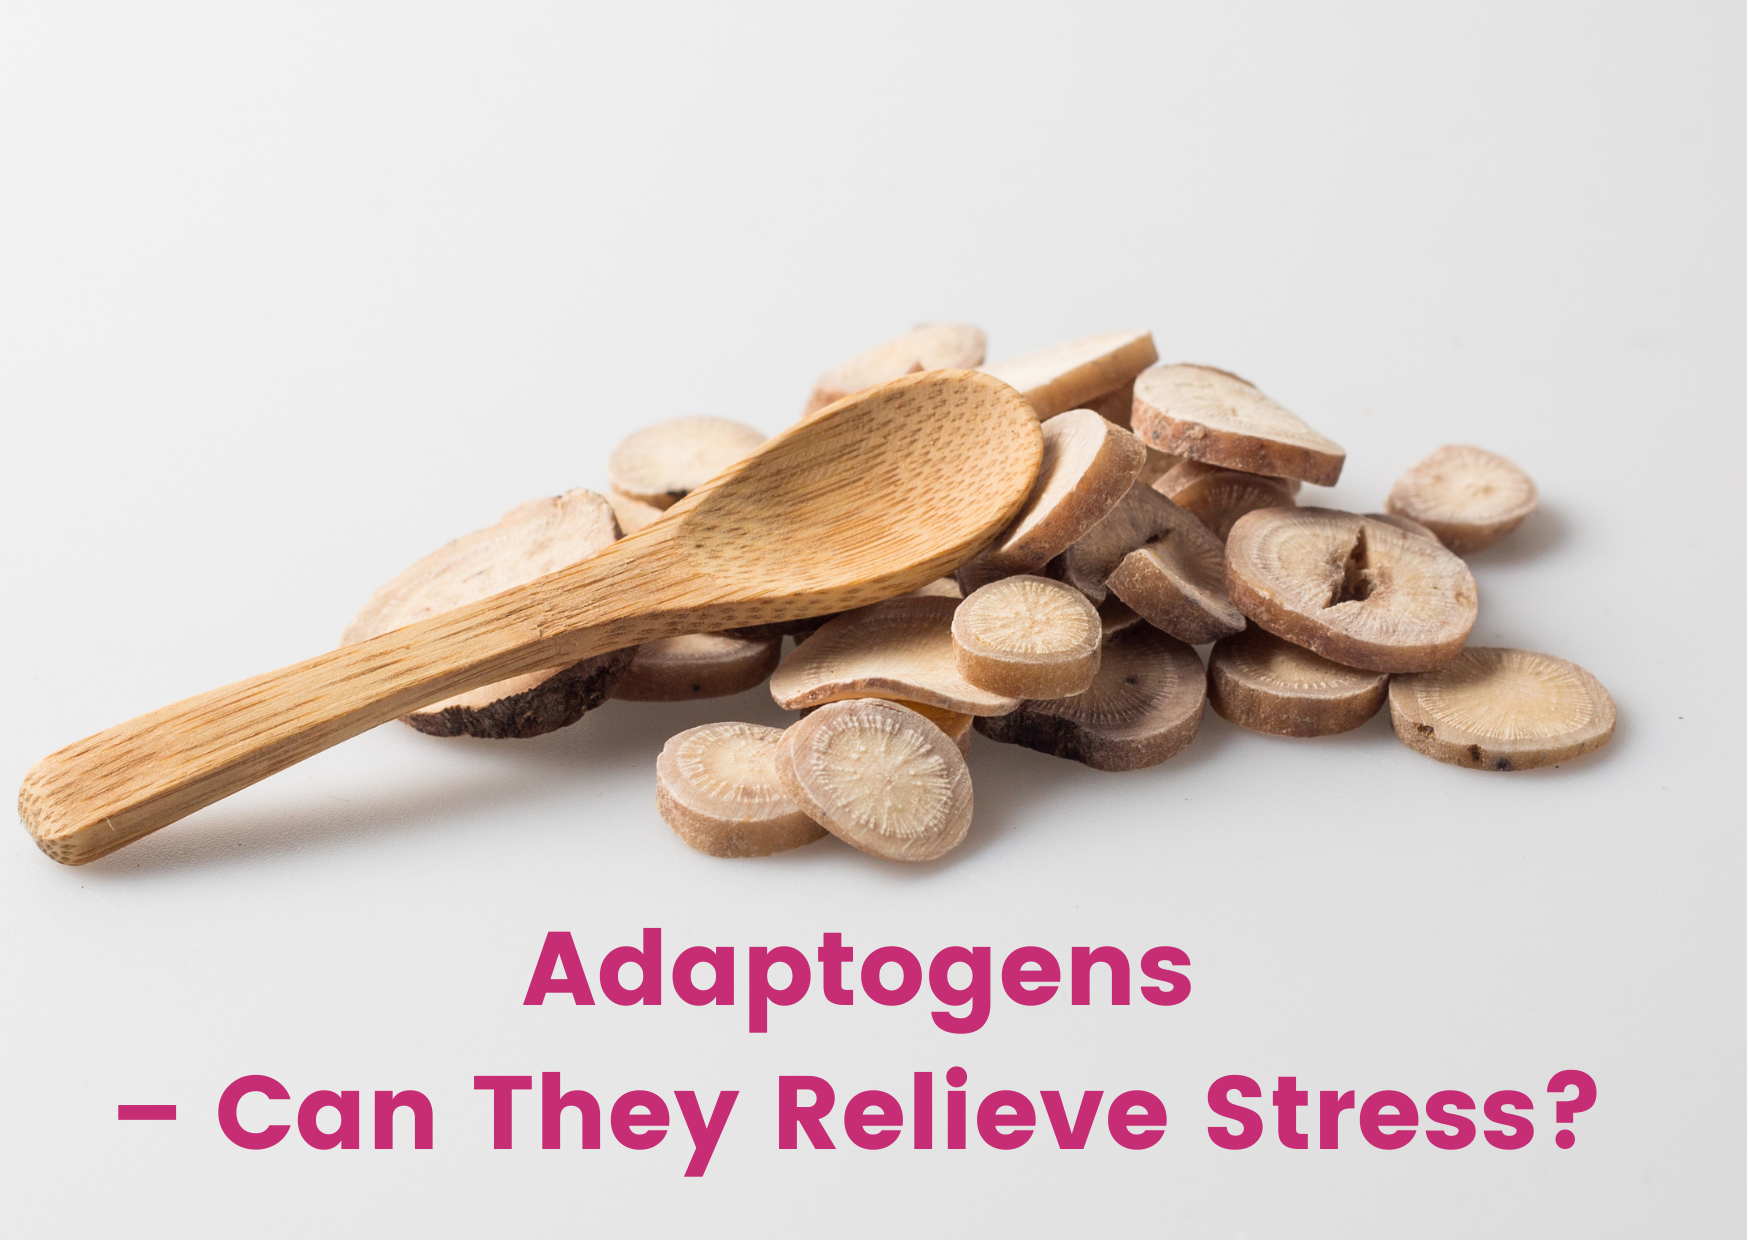 Can Adaptogens really assist your body and mind?